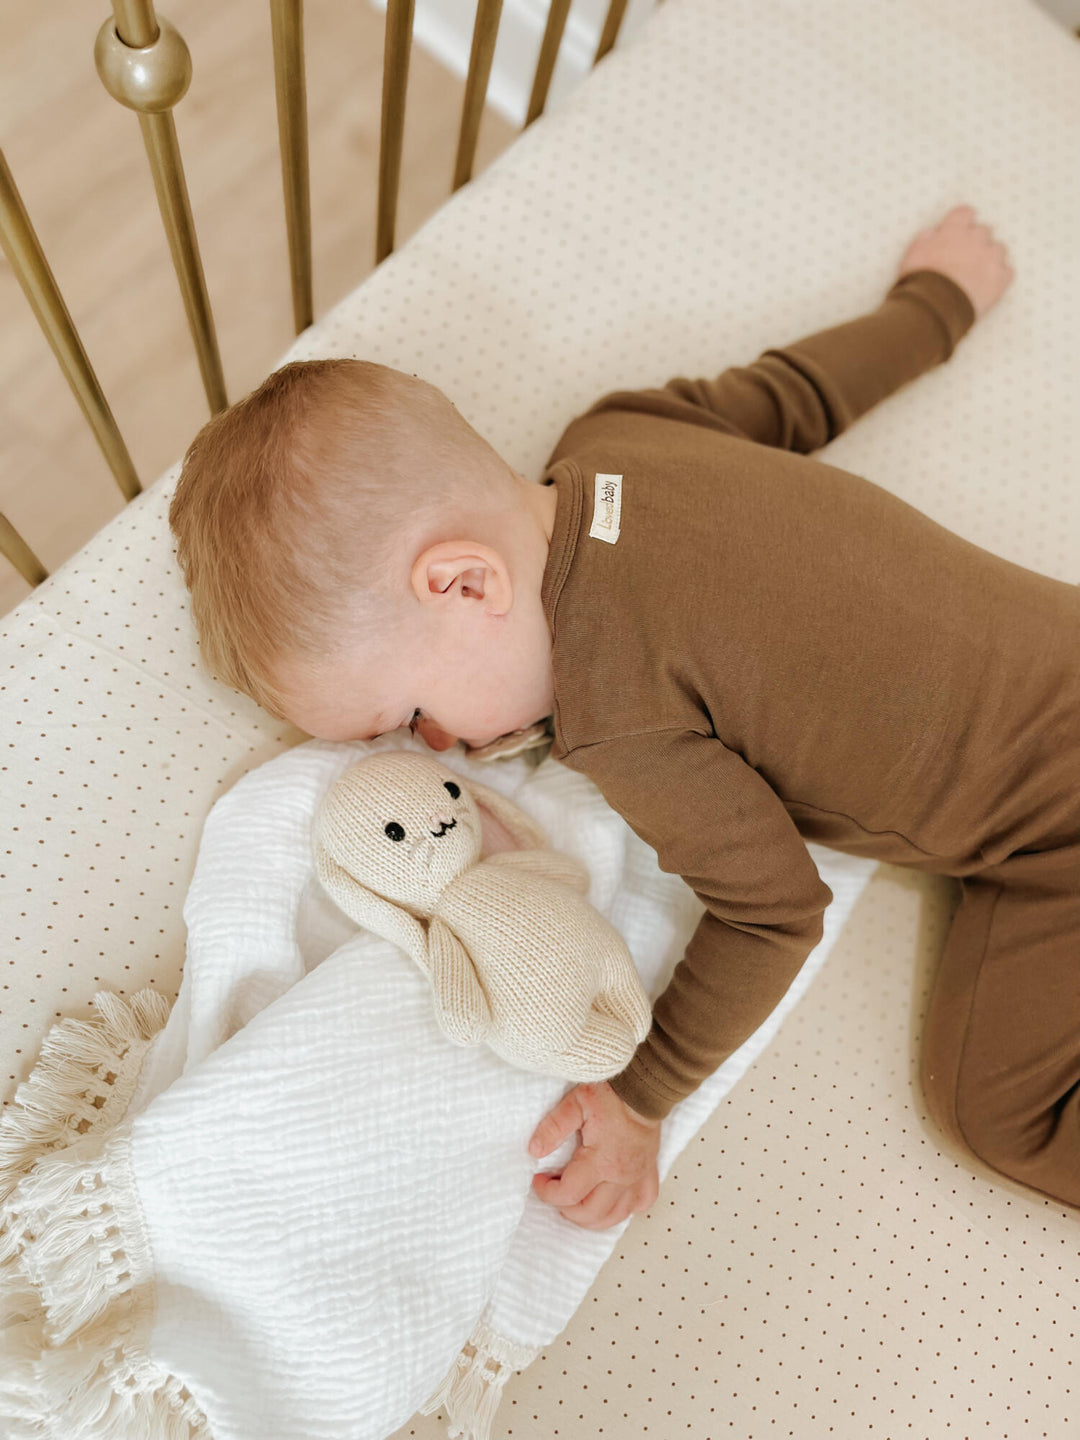 Child sleeping in crib. Mattress in the crib is fitted with our crib sheet in the Stone Dot color option.